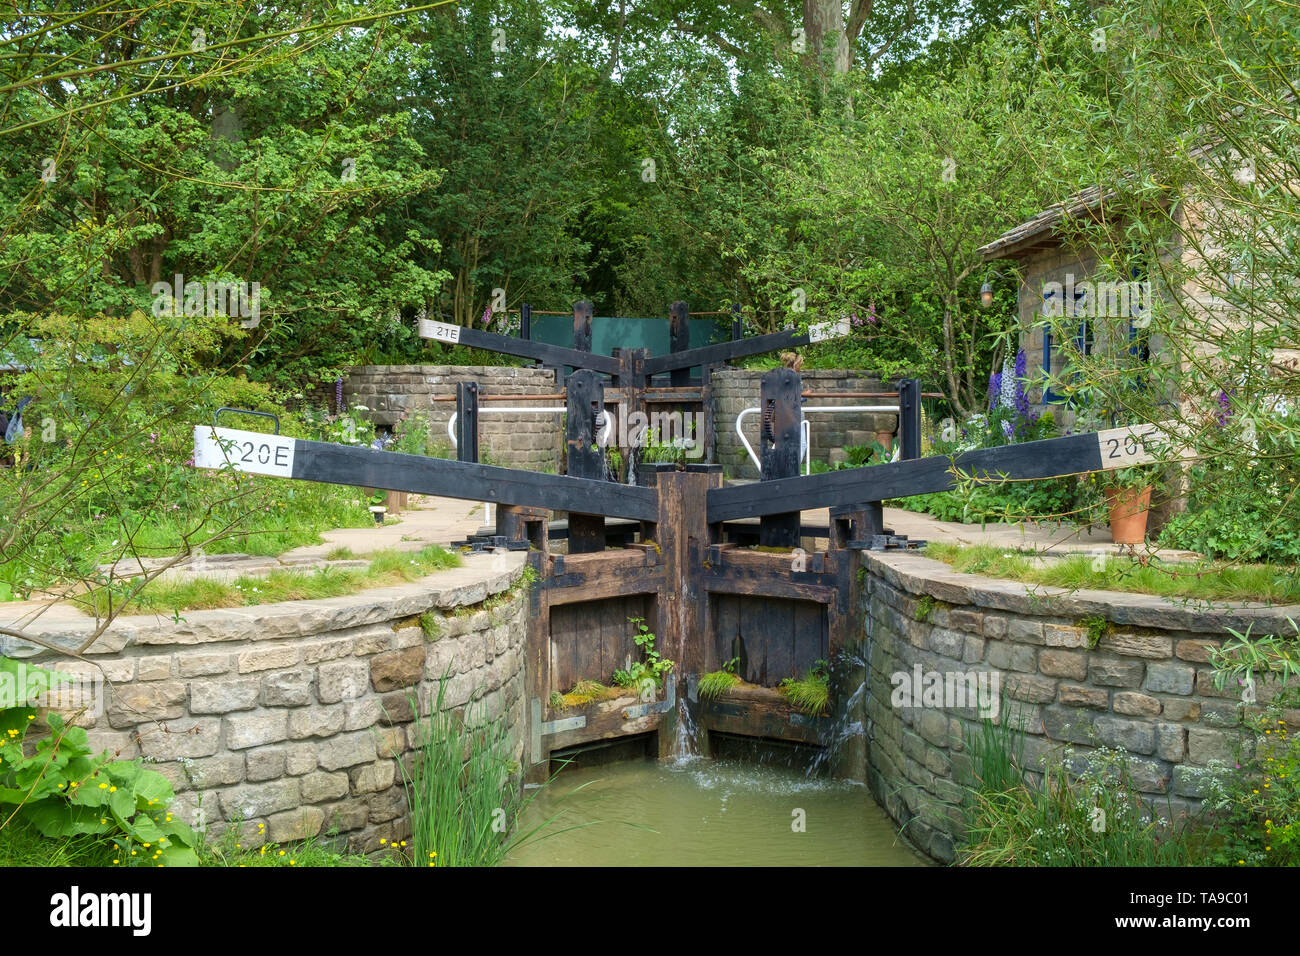 London, UK - May 22nd 2019: RHS Chelsea Flower Show, the Yorkshire Garden paying tribute to the county's nature and industrial heritage. Stock Photo